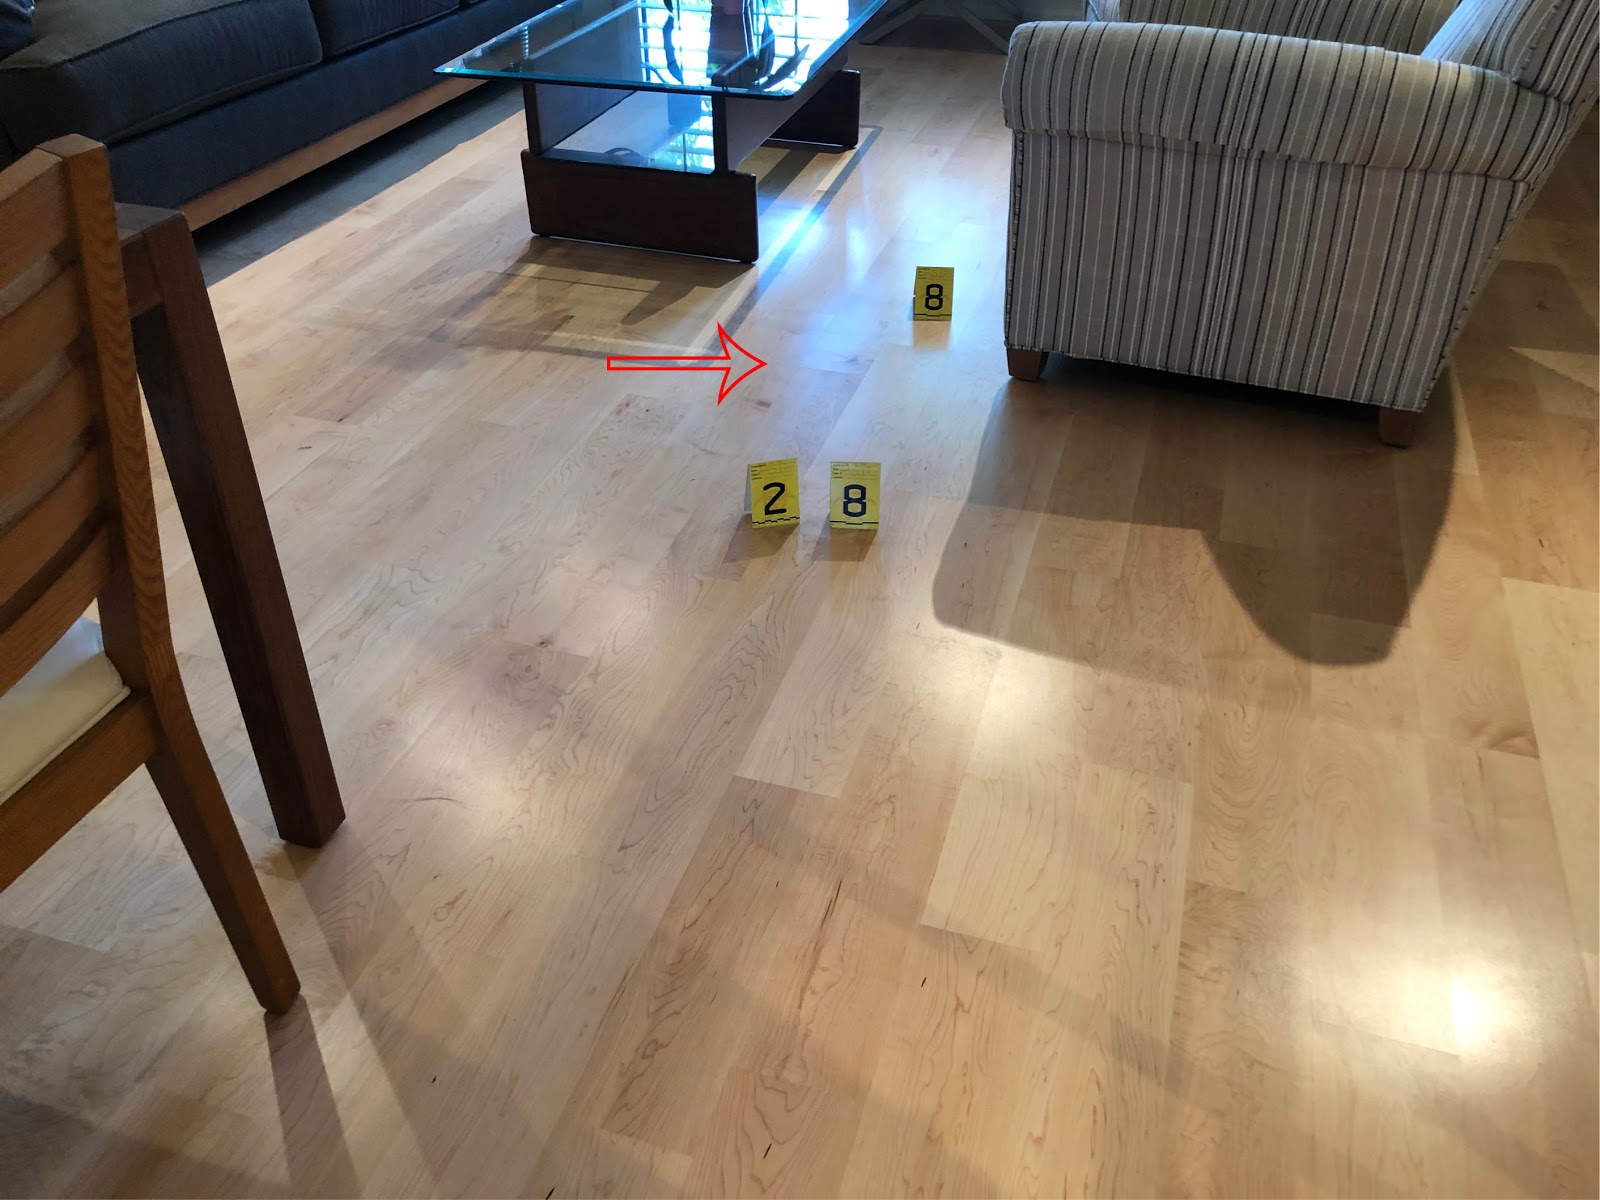 NWFA (National Wood Flooring Association Certificate ), Why It Matters